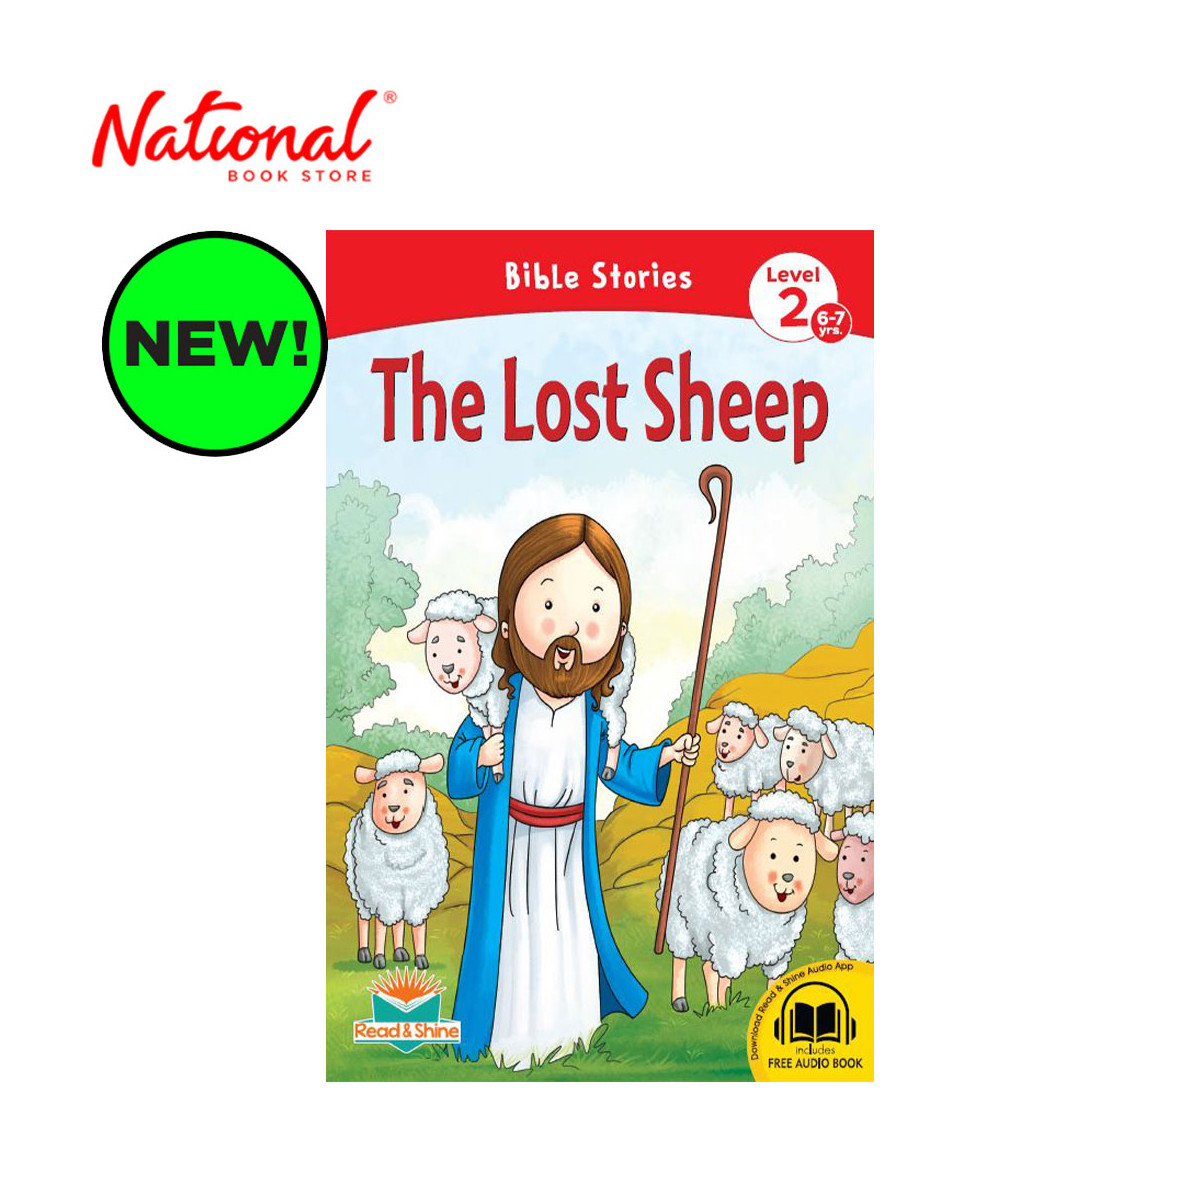 The Lost Sheep Level 2 - Trade Paperback - Bible Stories for Kids